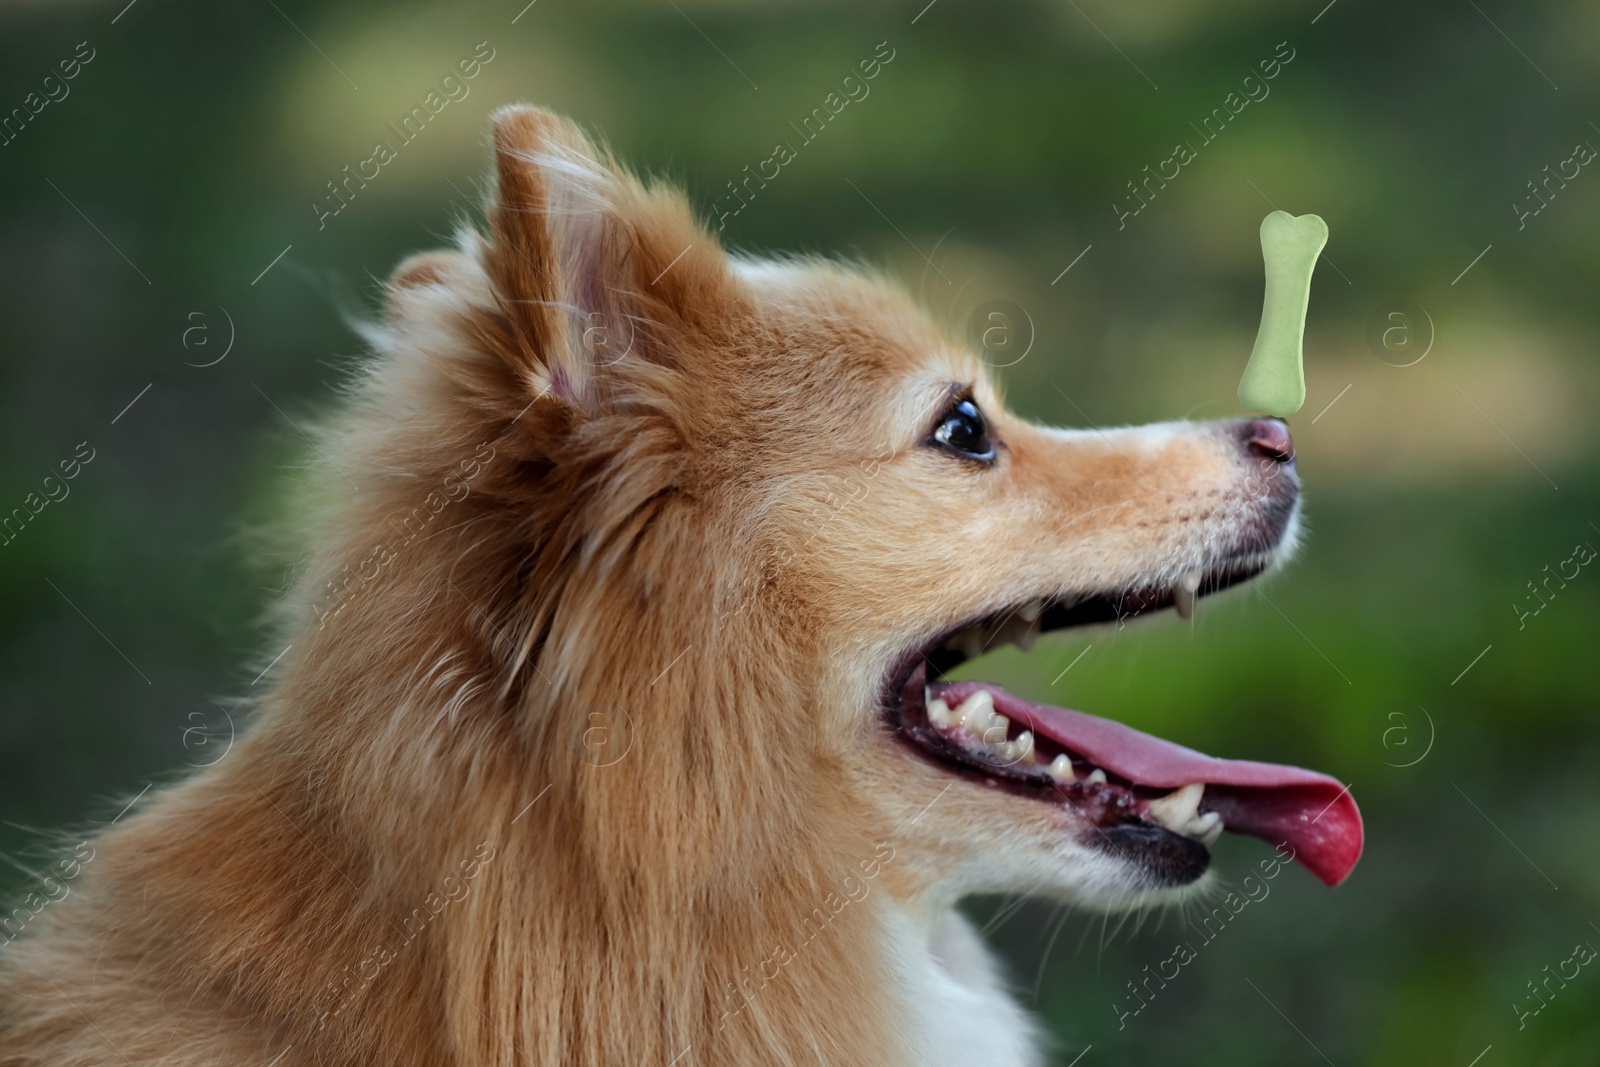 Image of Adorable dog with bone shaped cookie on nose outdoors